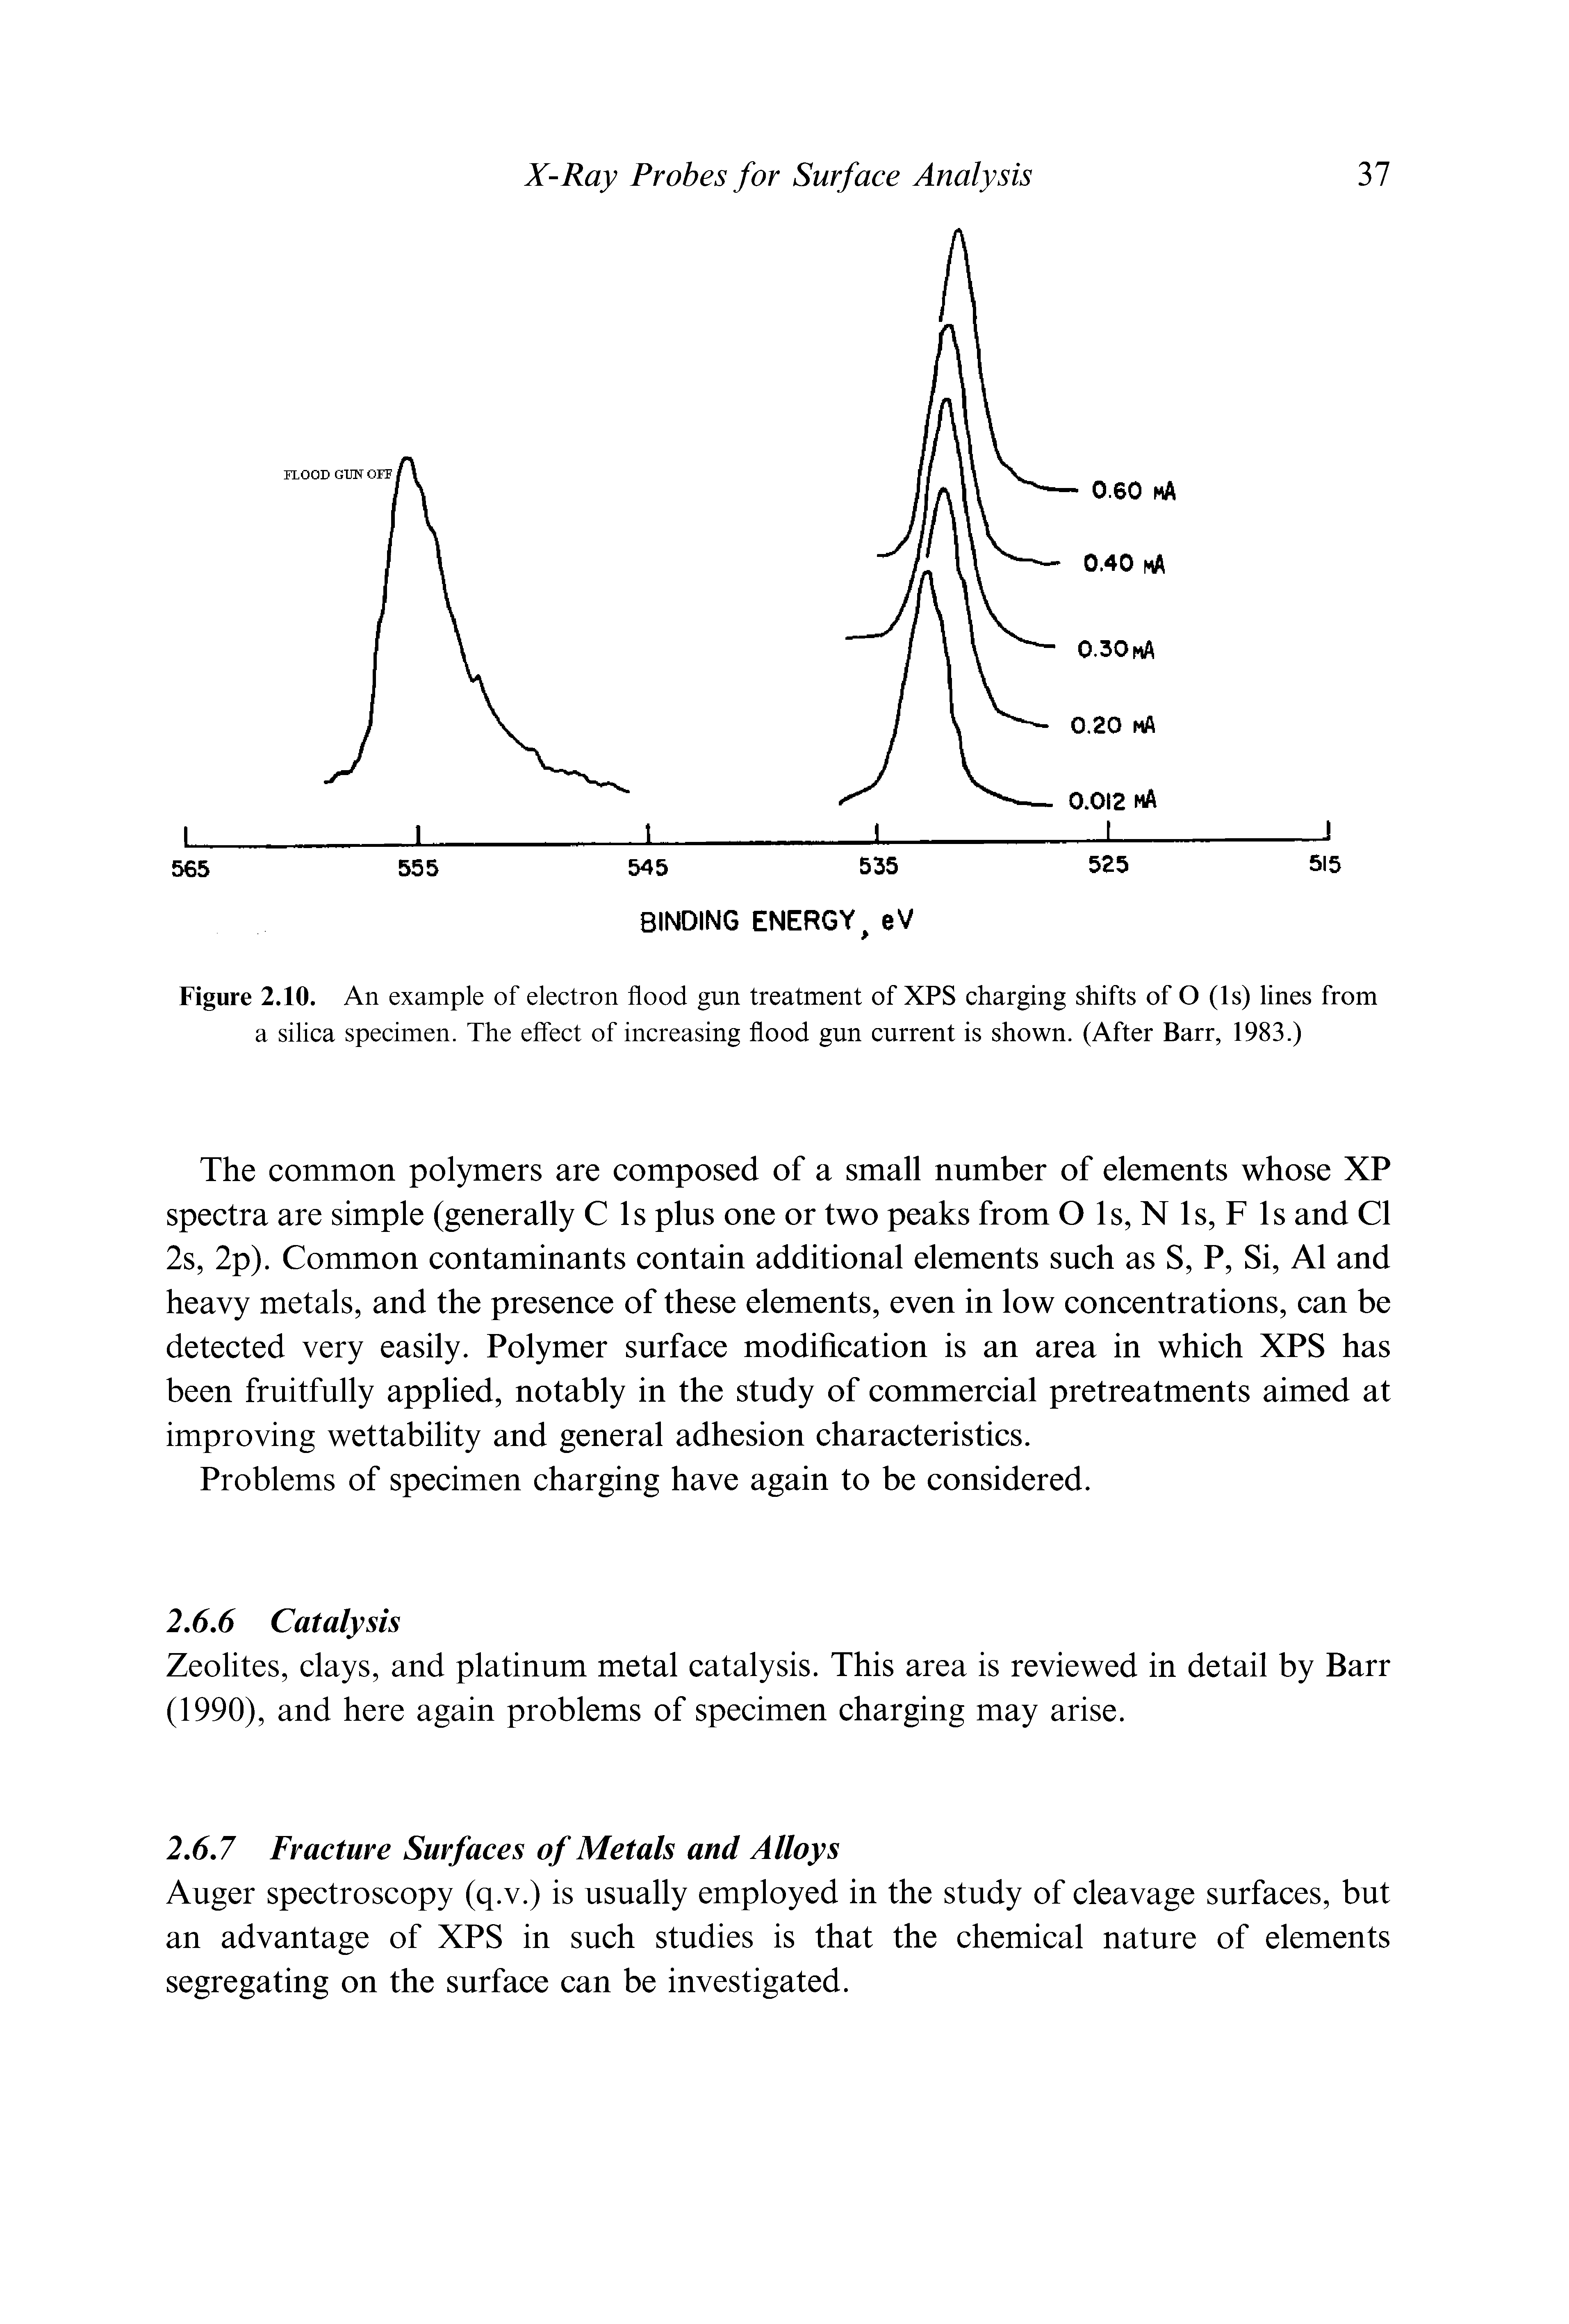 Figure 2.10. An example of electron flood gun treatment of XPS charging shifts of O (Is) lines from a silica specimen. The effect of increasing flood gun current is shown. (After Barr, 1983.)...